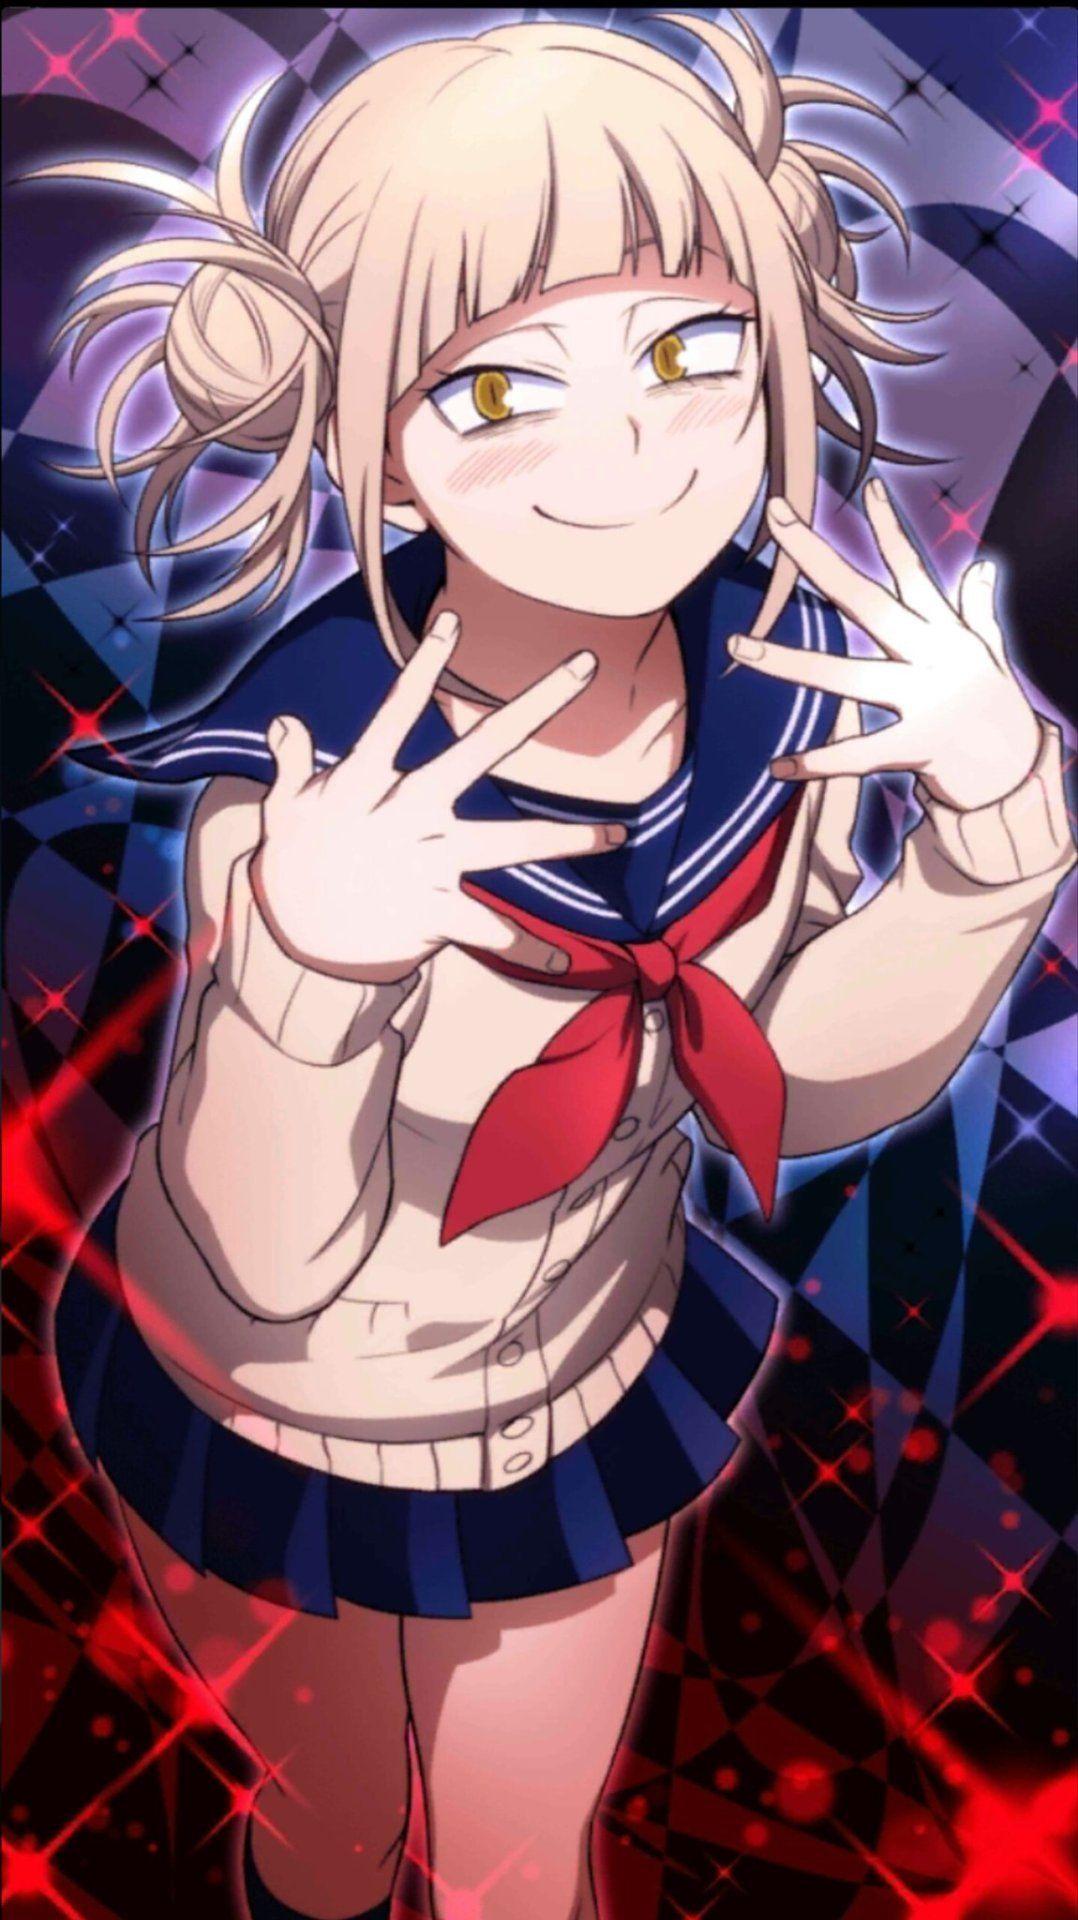 Himiko Toga Aesthetic Wallpapers - Wallpaper Cave